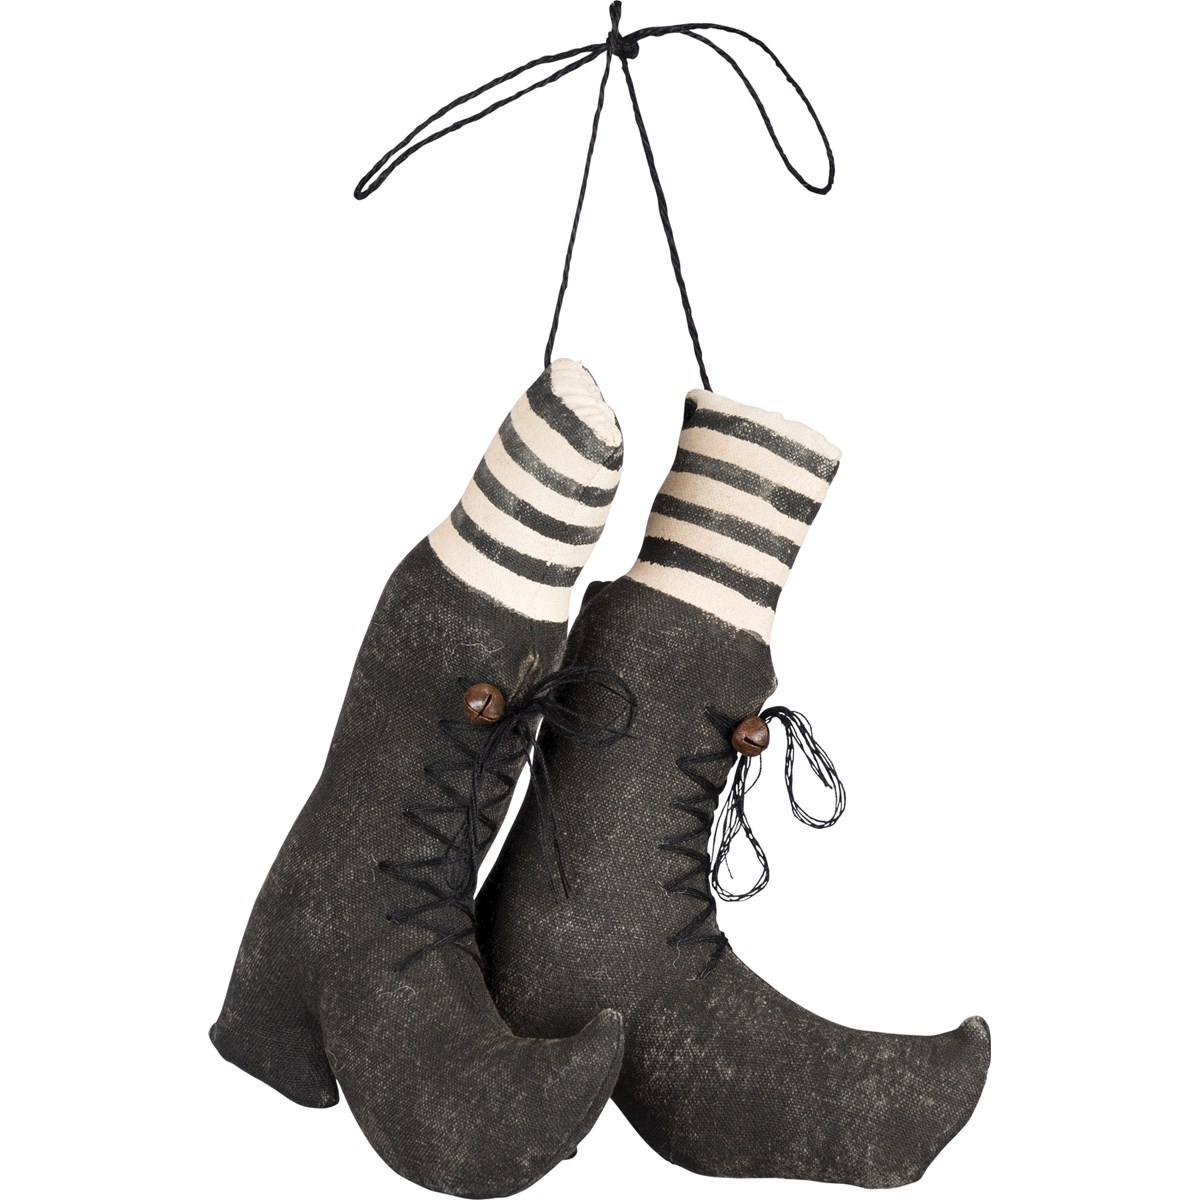 Fabric Witches' Boots - 6" x 8" x 2" - Fabric, String, Metal